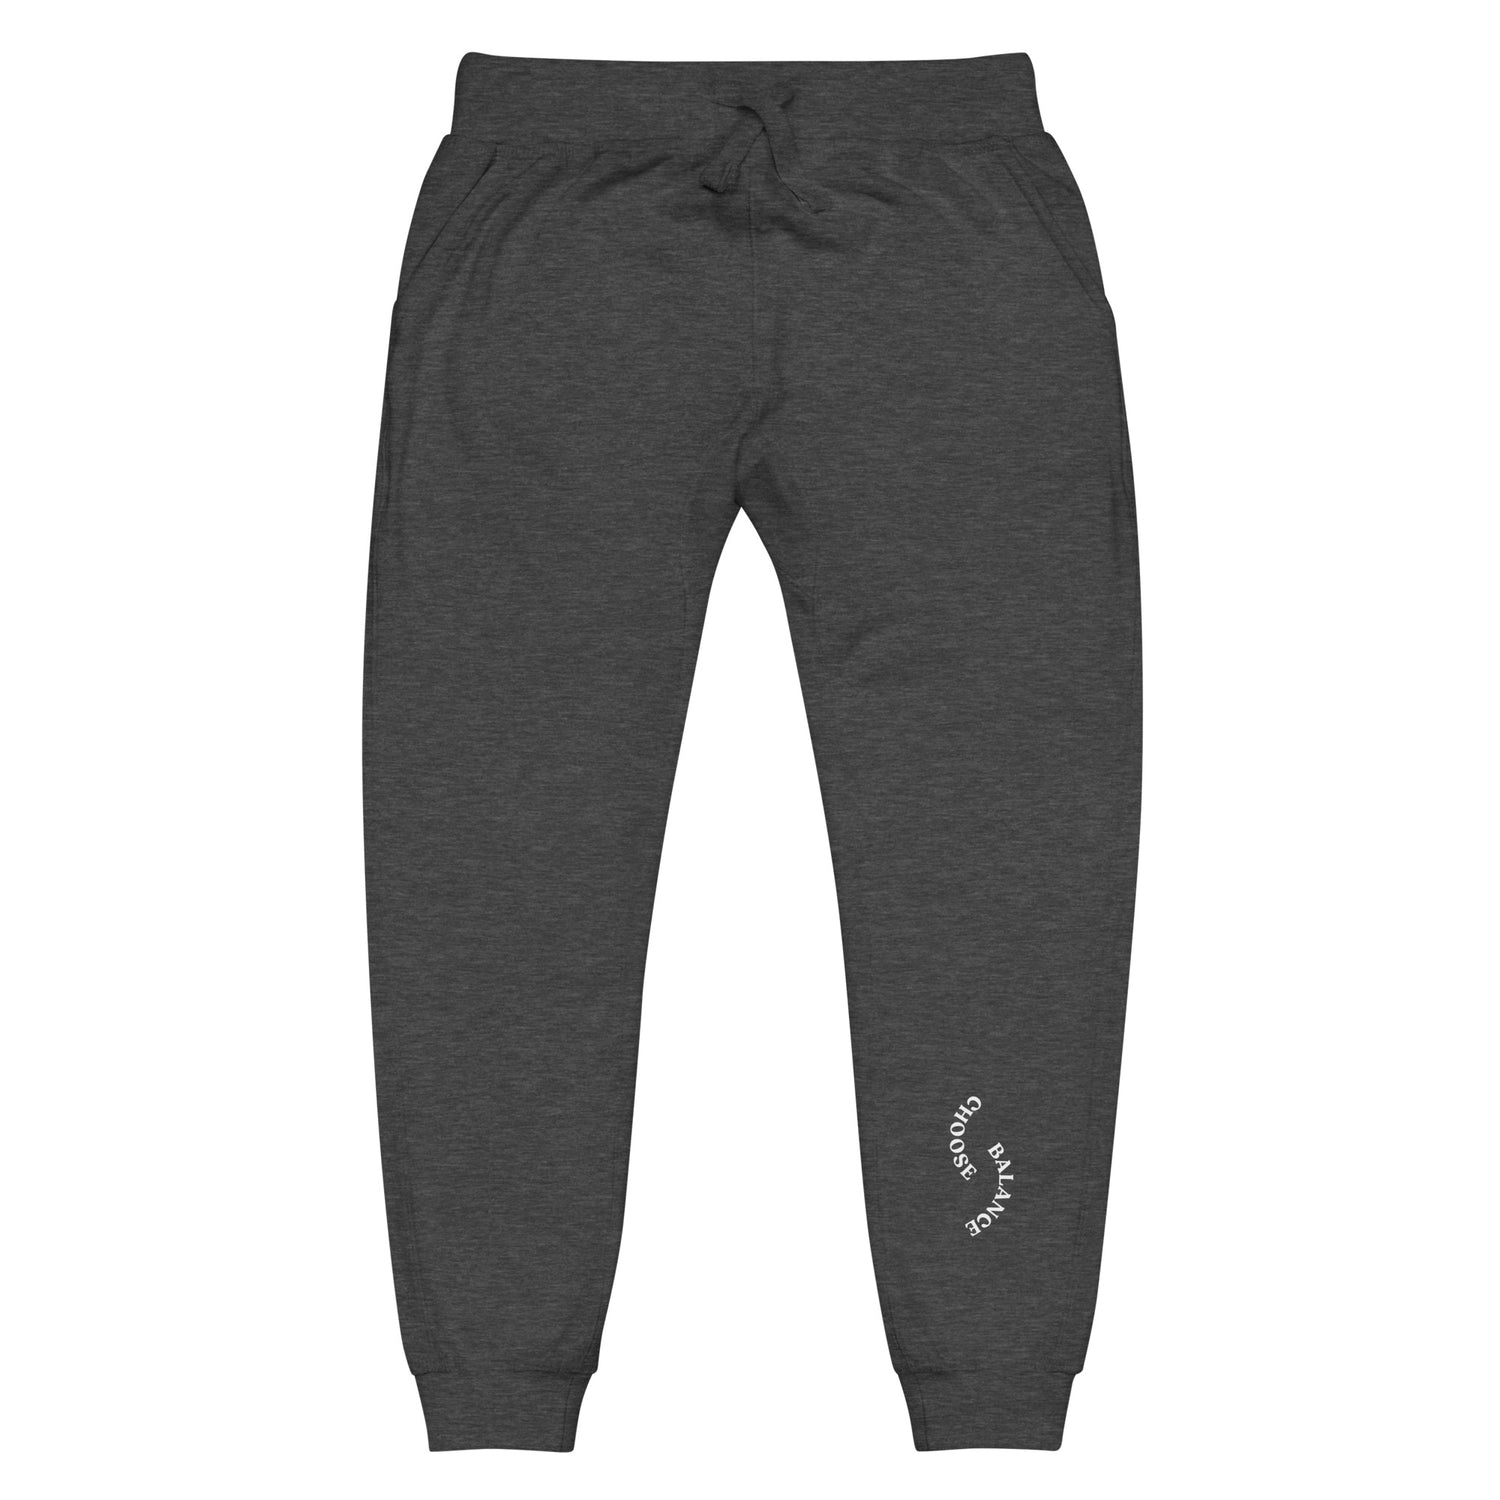 Charcoal Sweatpants that helps with mental health "Choose Balance"